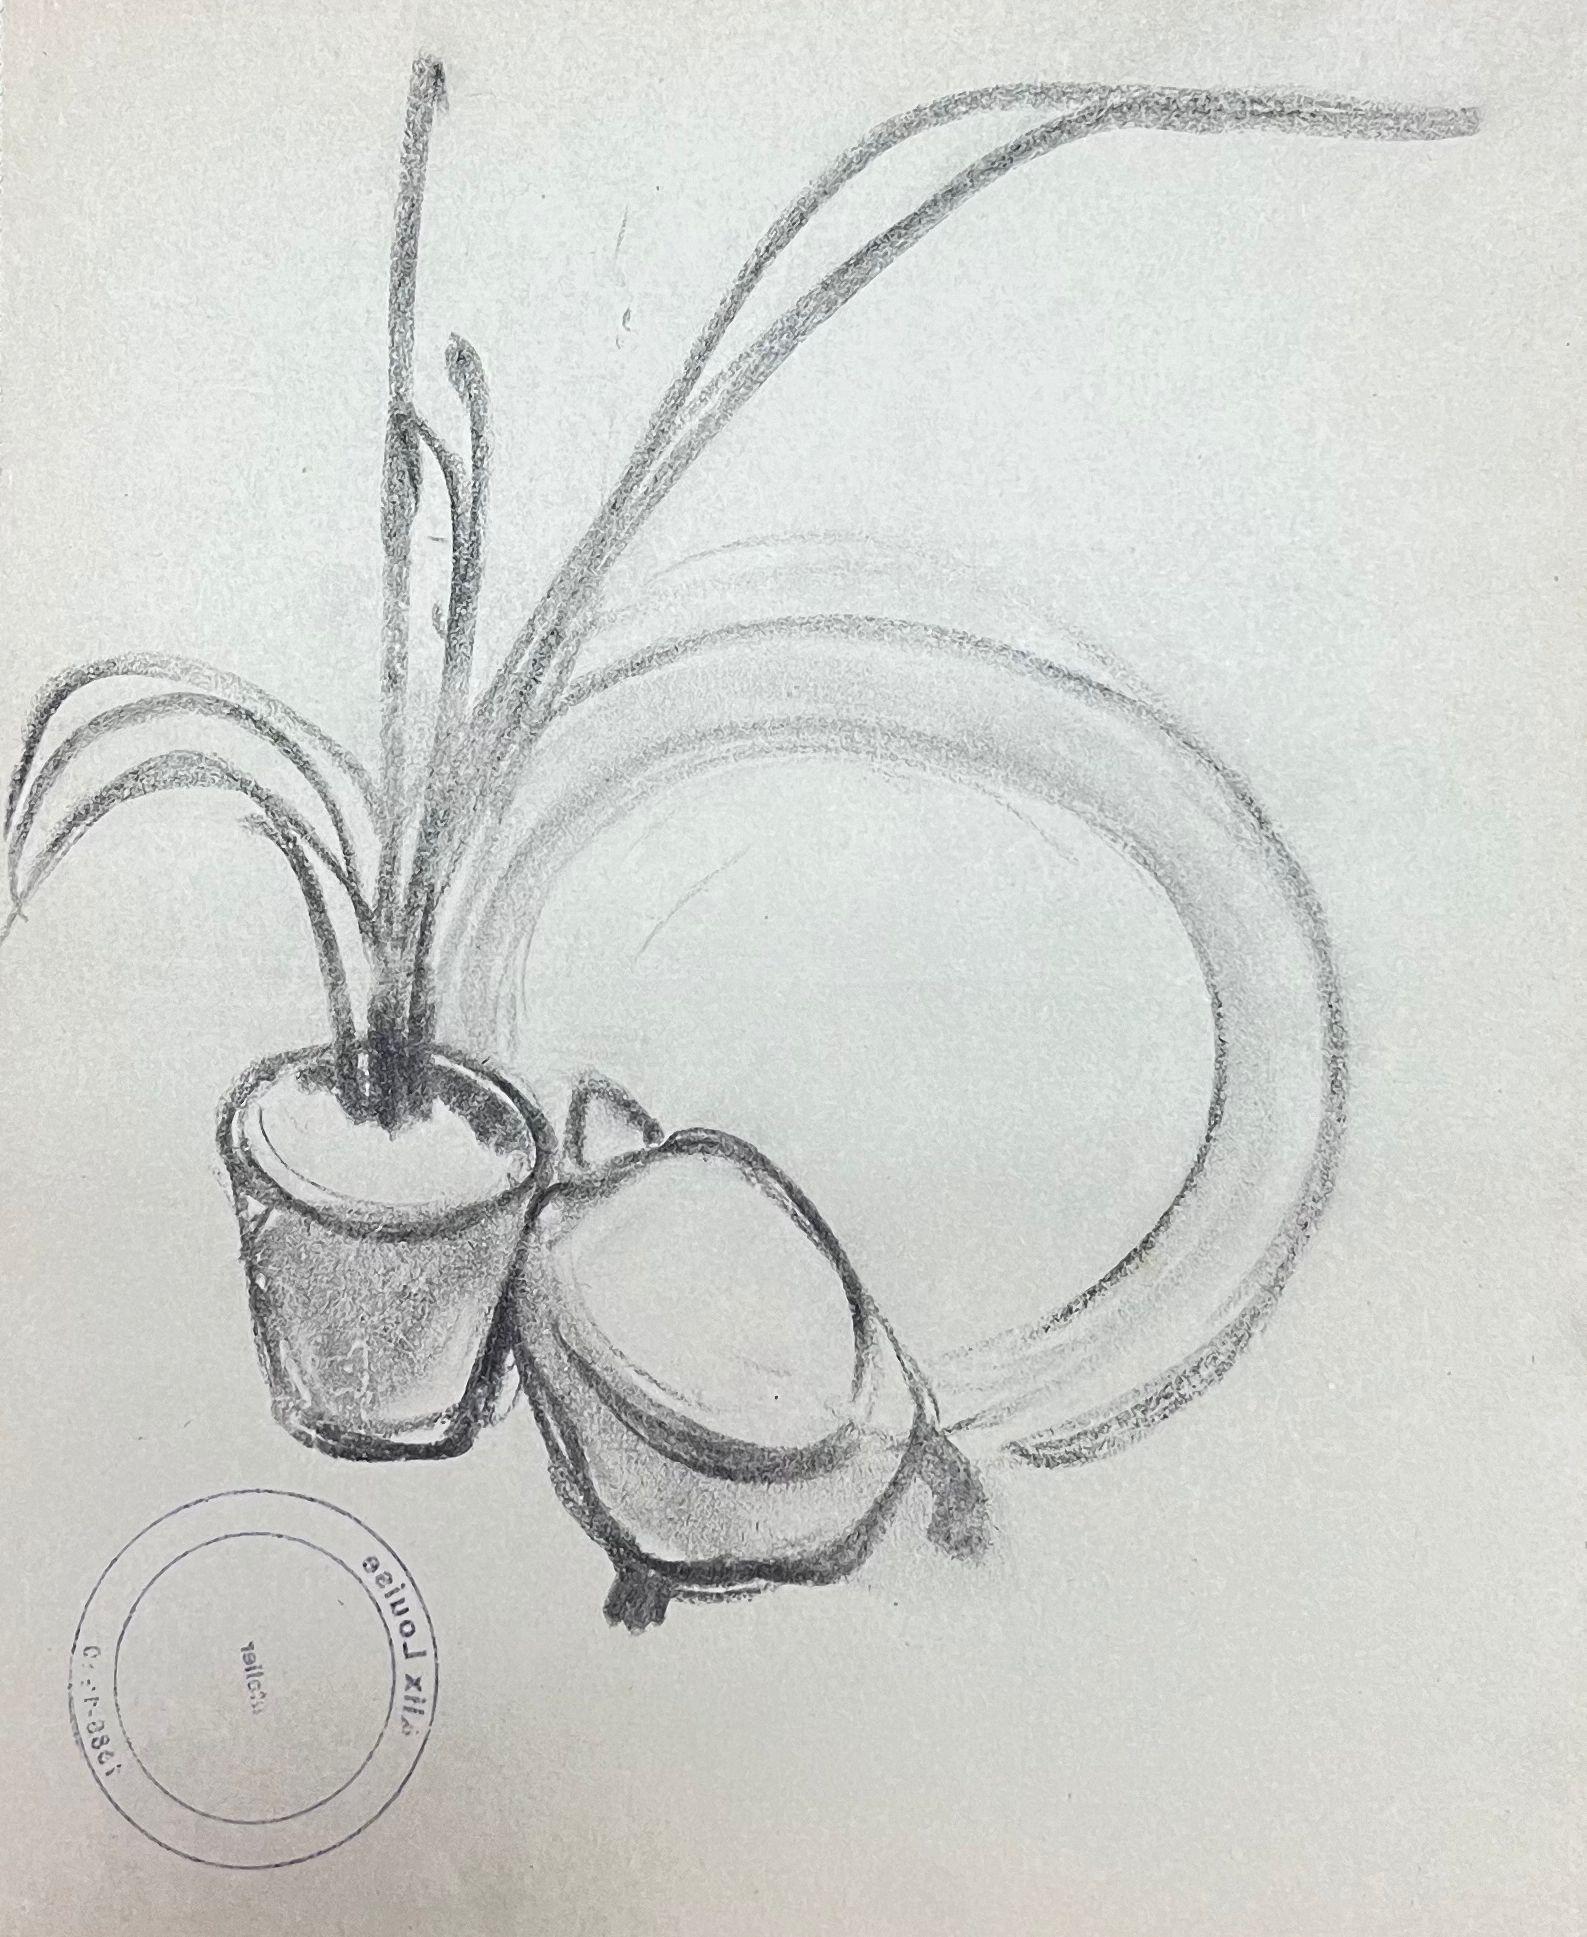 Aloe Vera Plant
by Louise Alix (French, 1888-1980) *see notes below
provenance stamp to the back 
black pastel drawing on artist paper, unframed
measures: 10 high by 8.25 inches wide
condition: overall very good and sound, a few scuffs and marks to